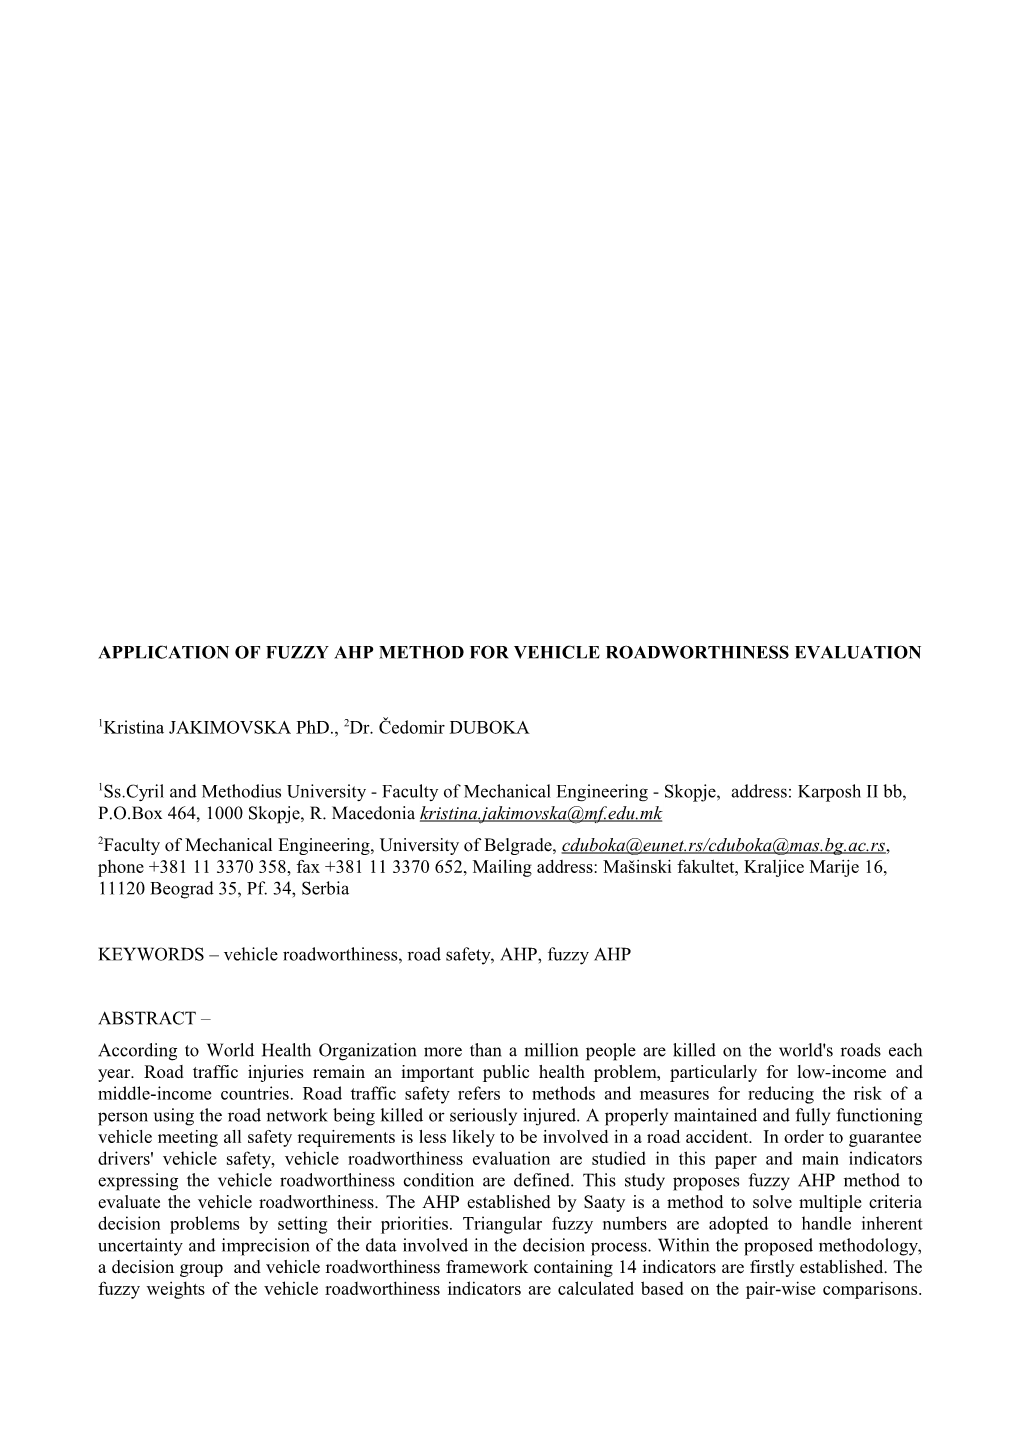 Application of Fuzzy Ahp Method for Vehicle Roadworthiness Evaluation